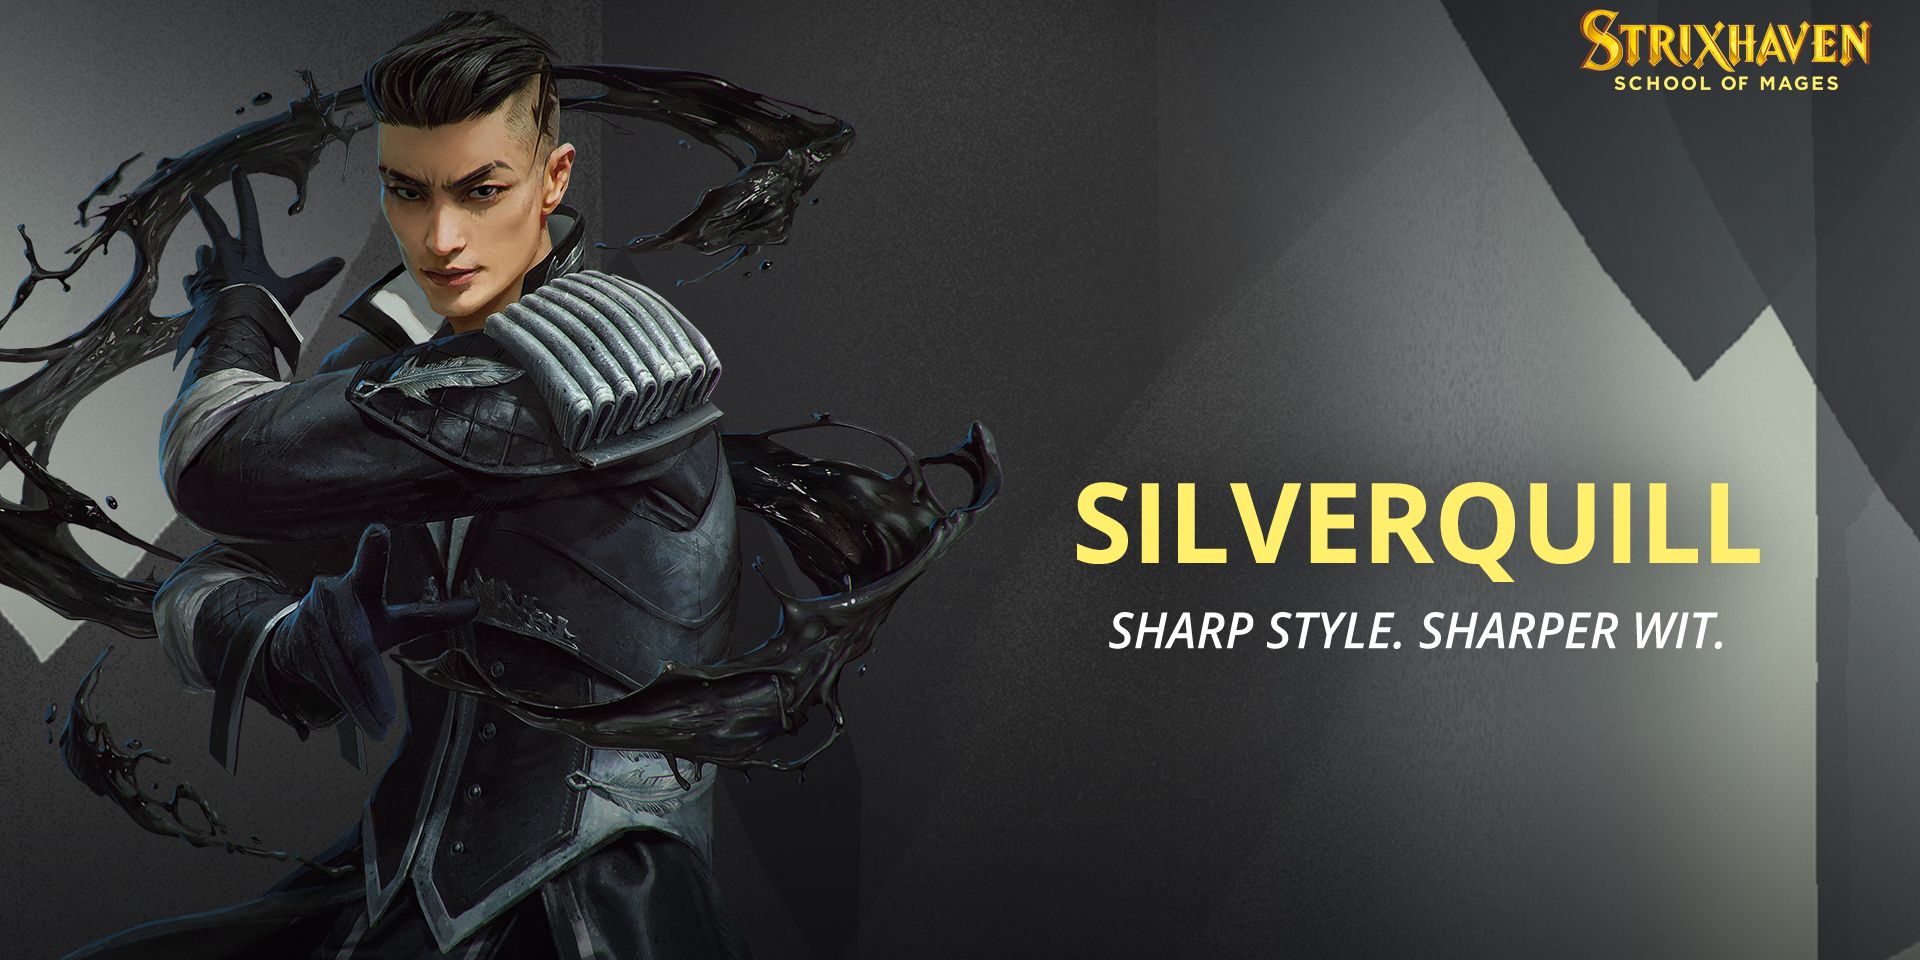 A male wizard with a silver quill emblem on one arm, along with streams of ink he pulls through the air. Next to him is text that reads &quot;SILVERQUILL - Sharp style. Sharper Wit.&quot;